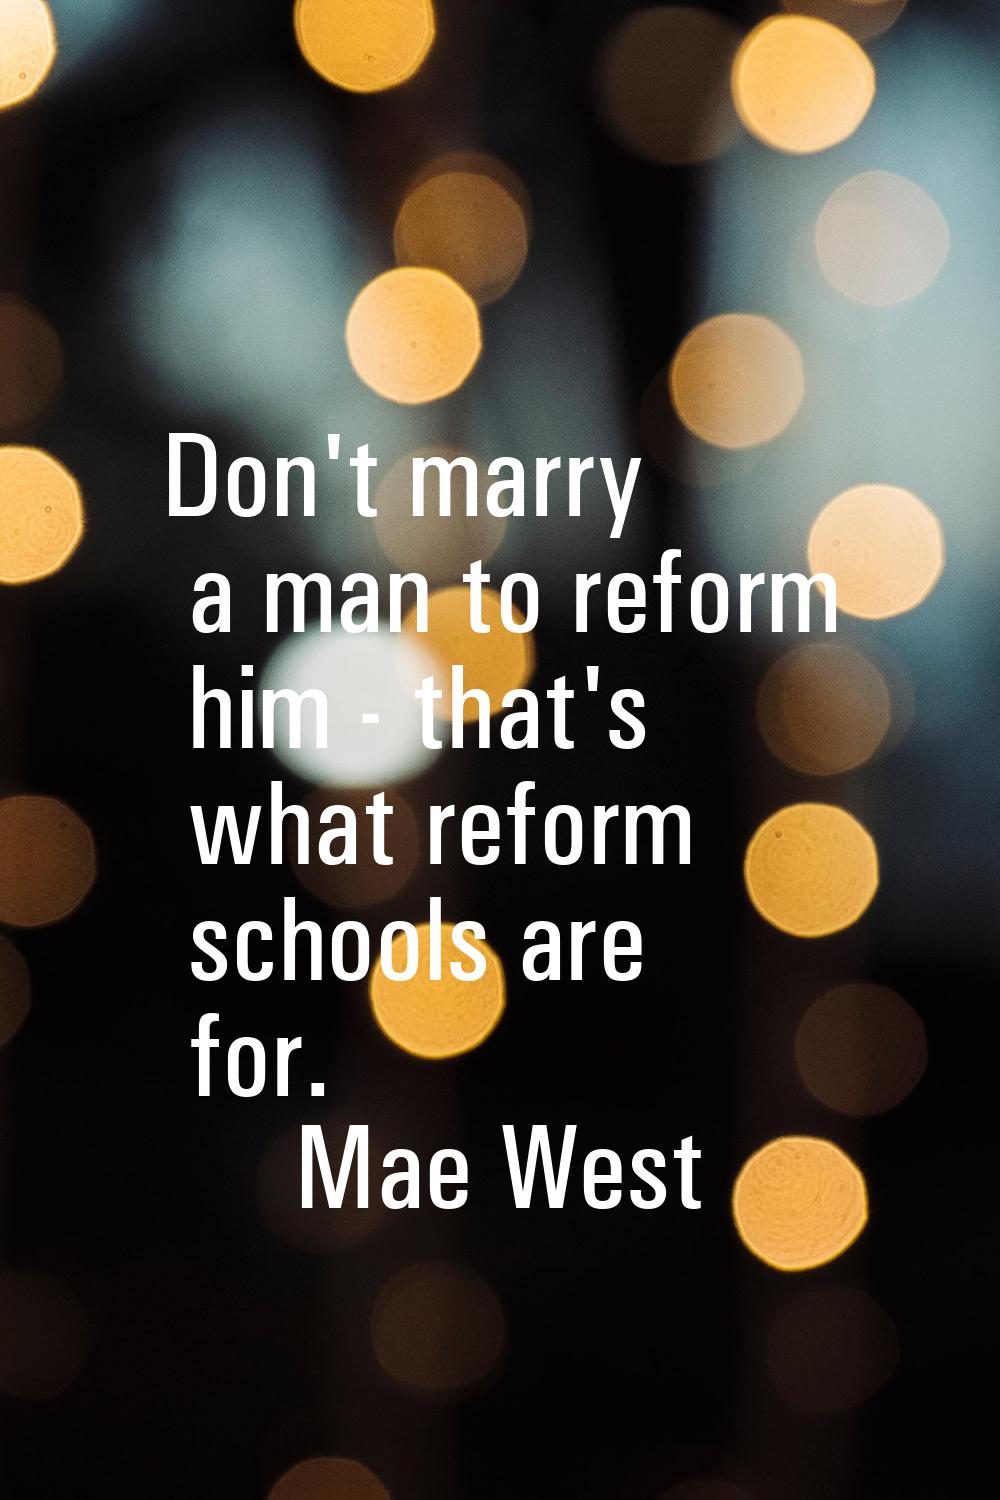 Don't marry a man to reform him - that's what reform schools are for.